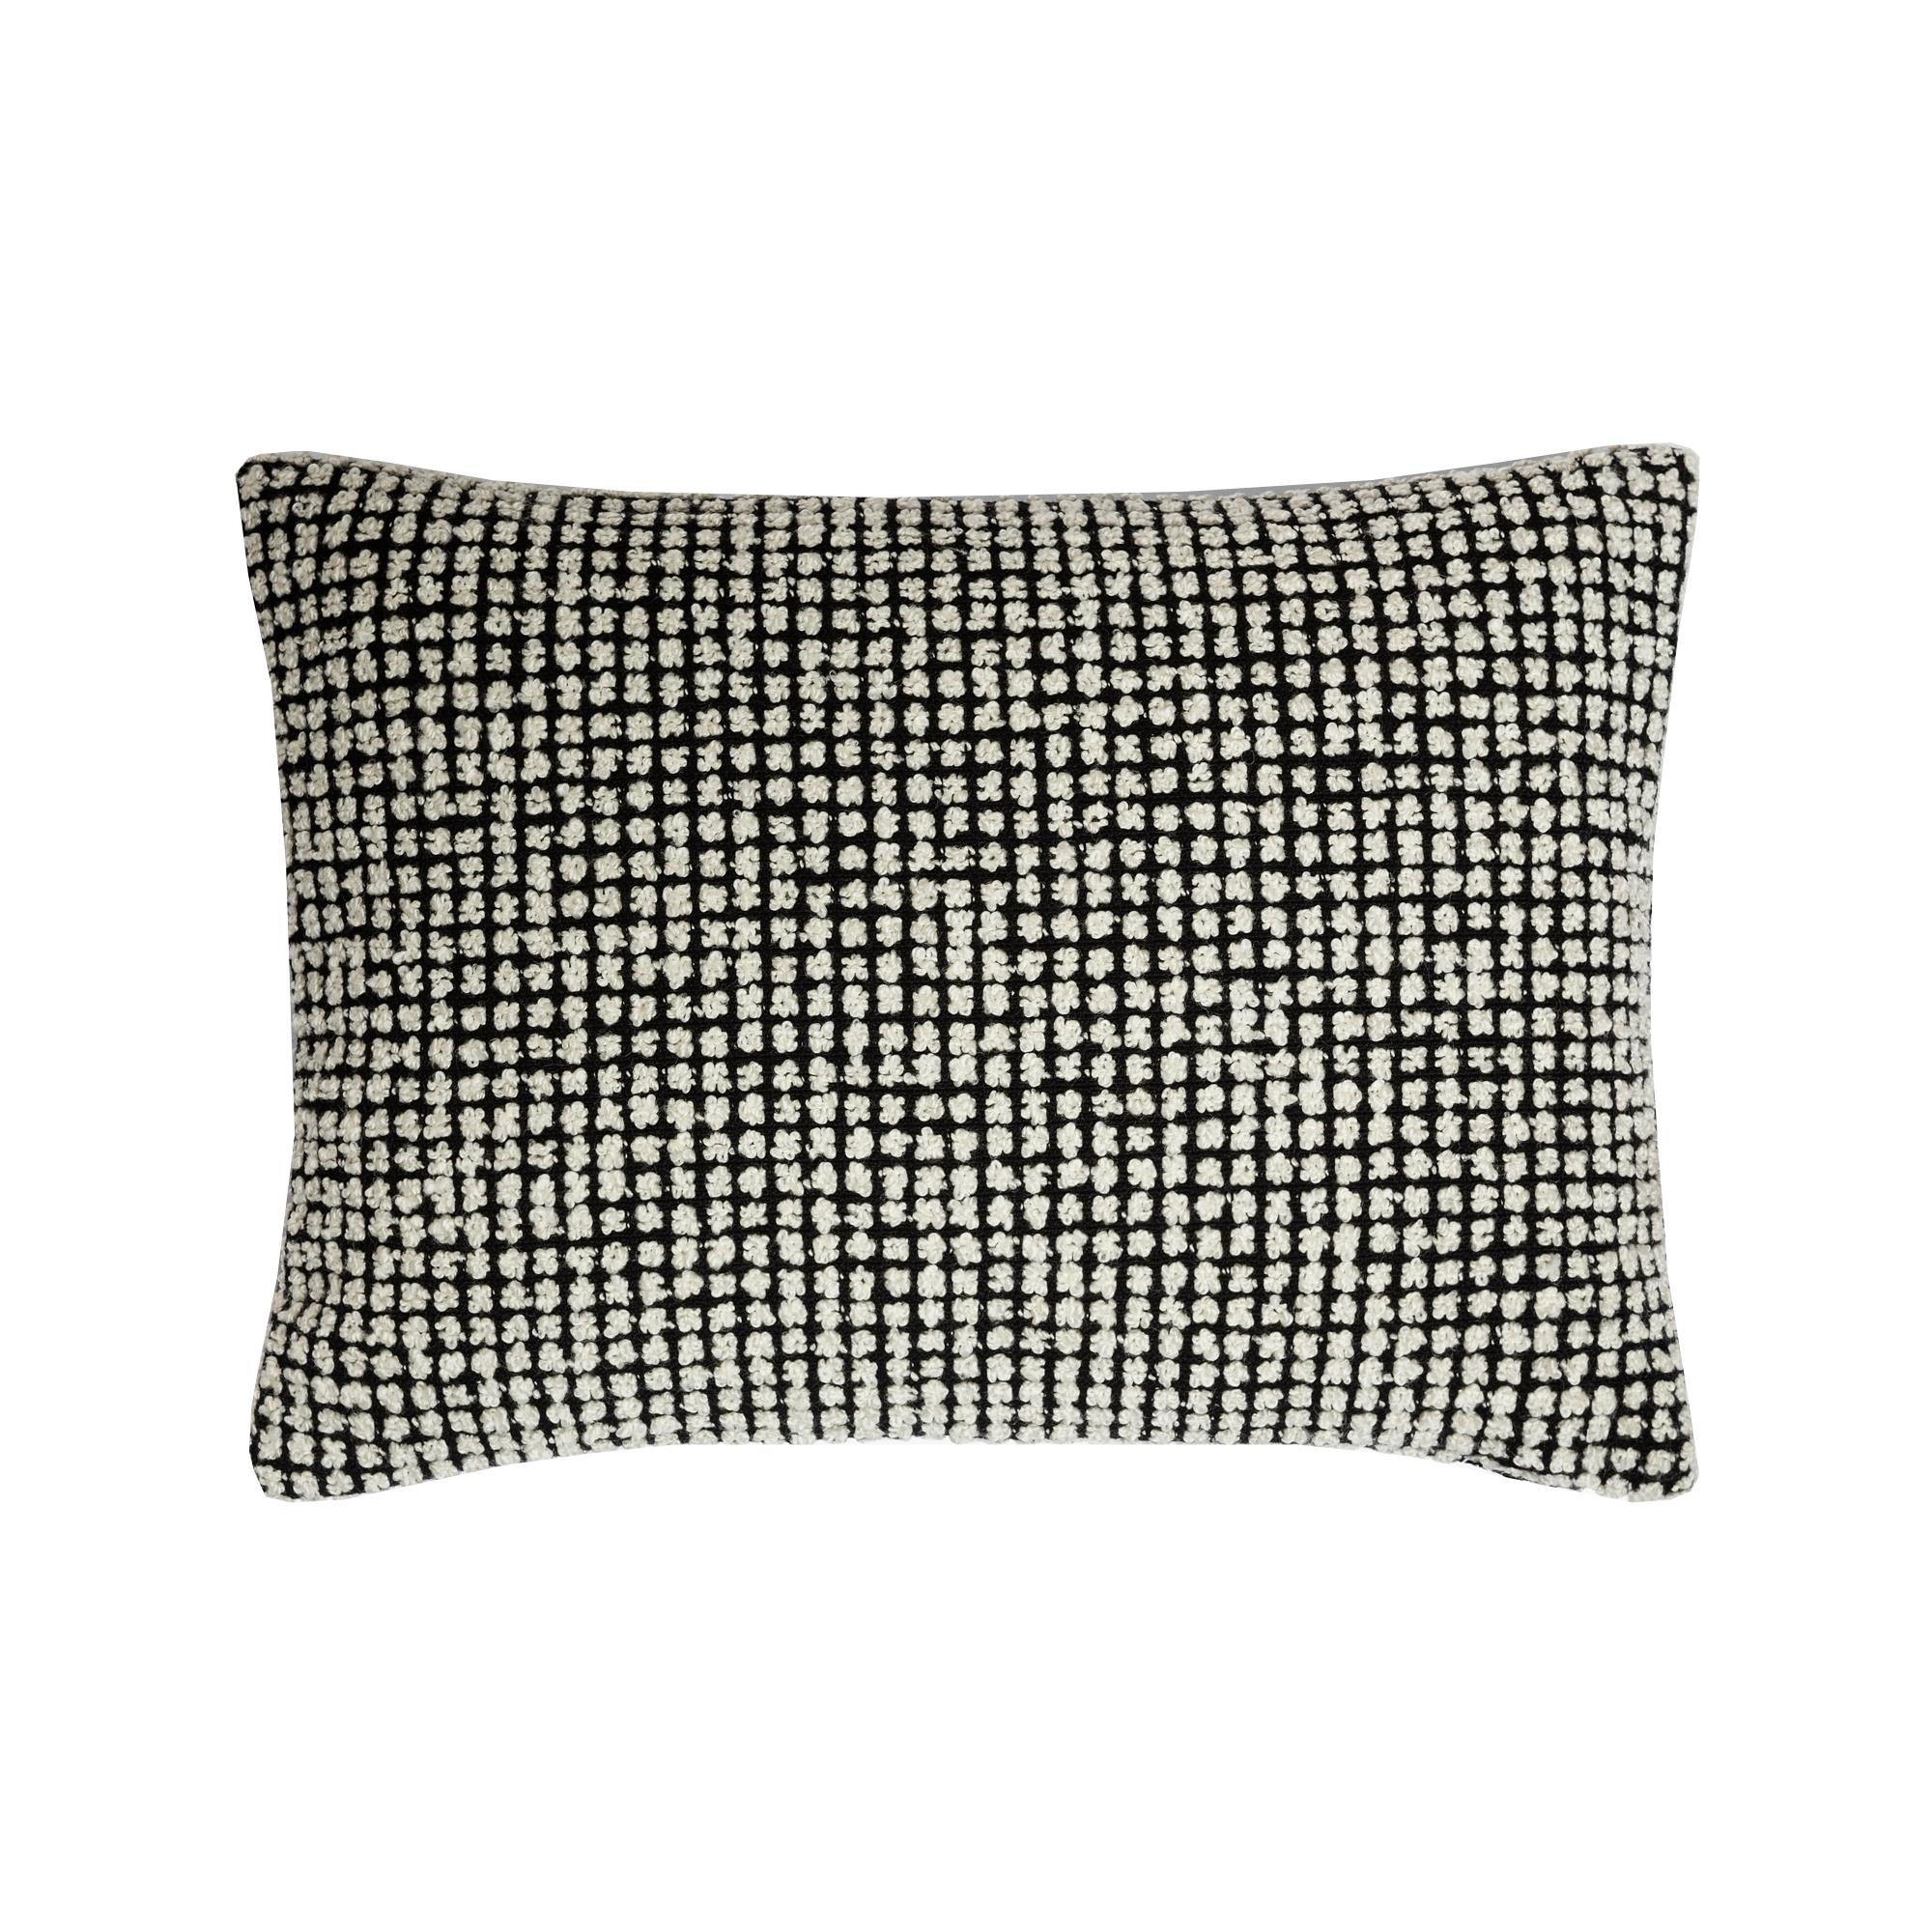 These stunning cushions boast the elegance of traditional patterns, enlivened with different textures and color combinations. Characterized by tone-on-tone color or by refined tweed texture, with high-quality wool fabric with herringbone effect and